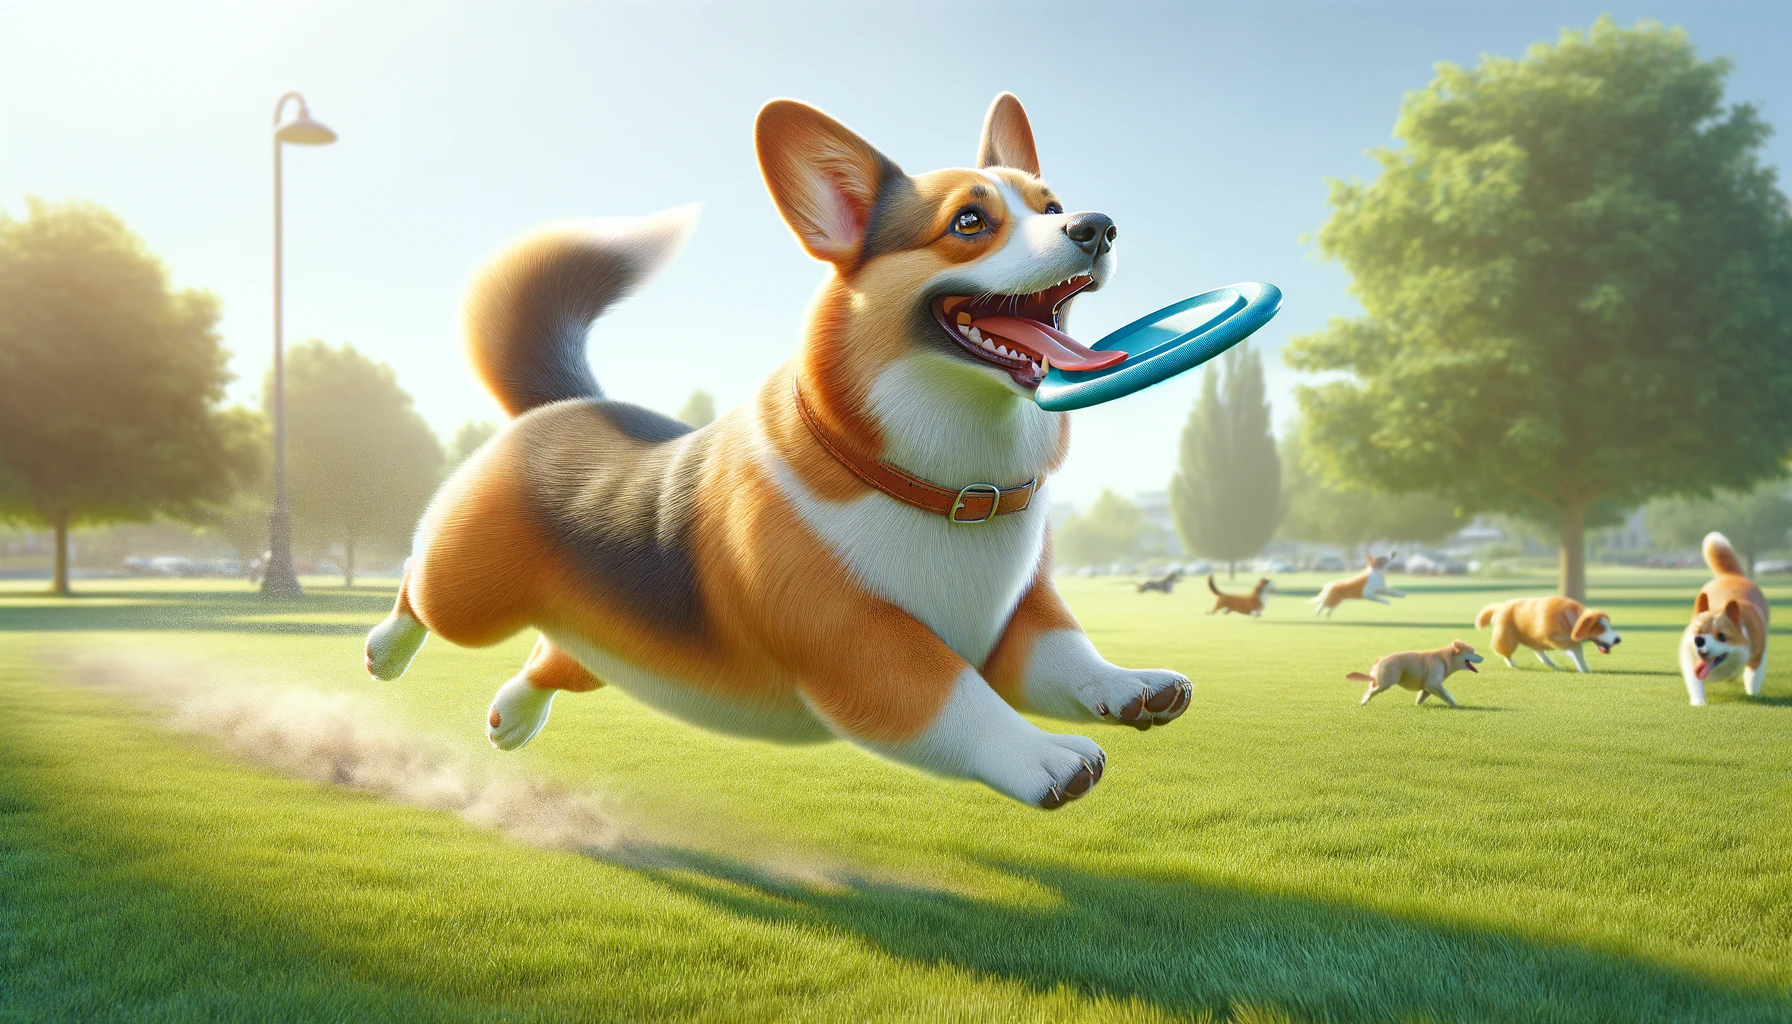 A Corgidor running in a park with a frisbee in its mouth